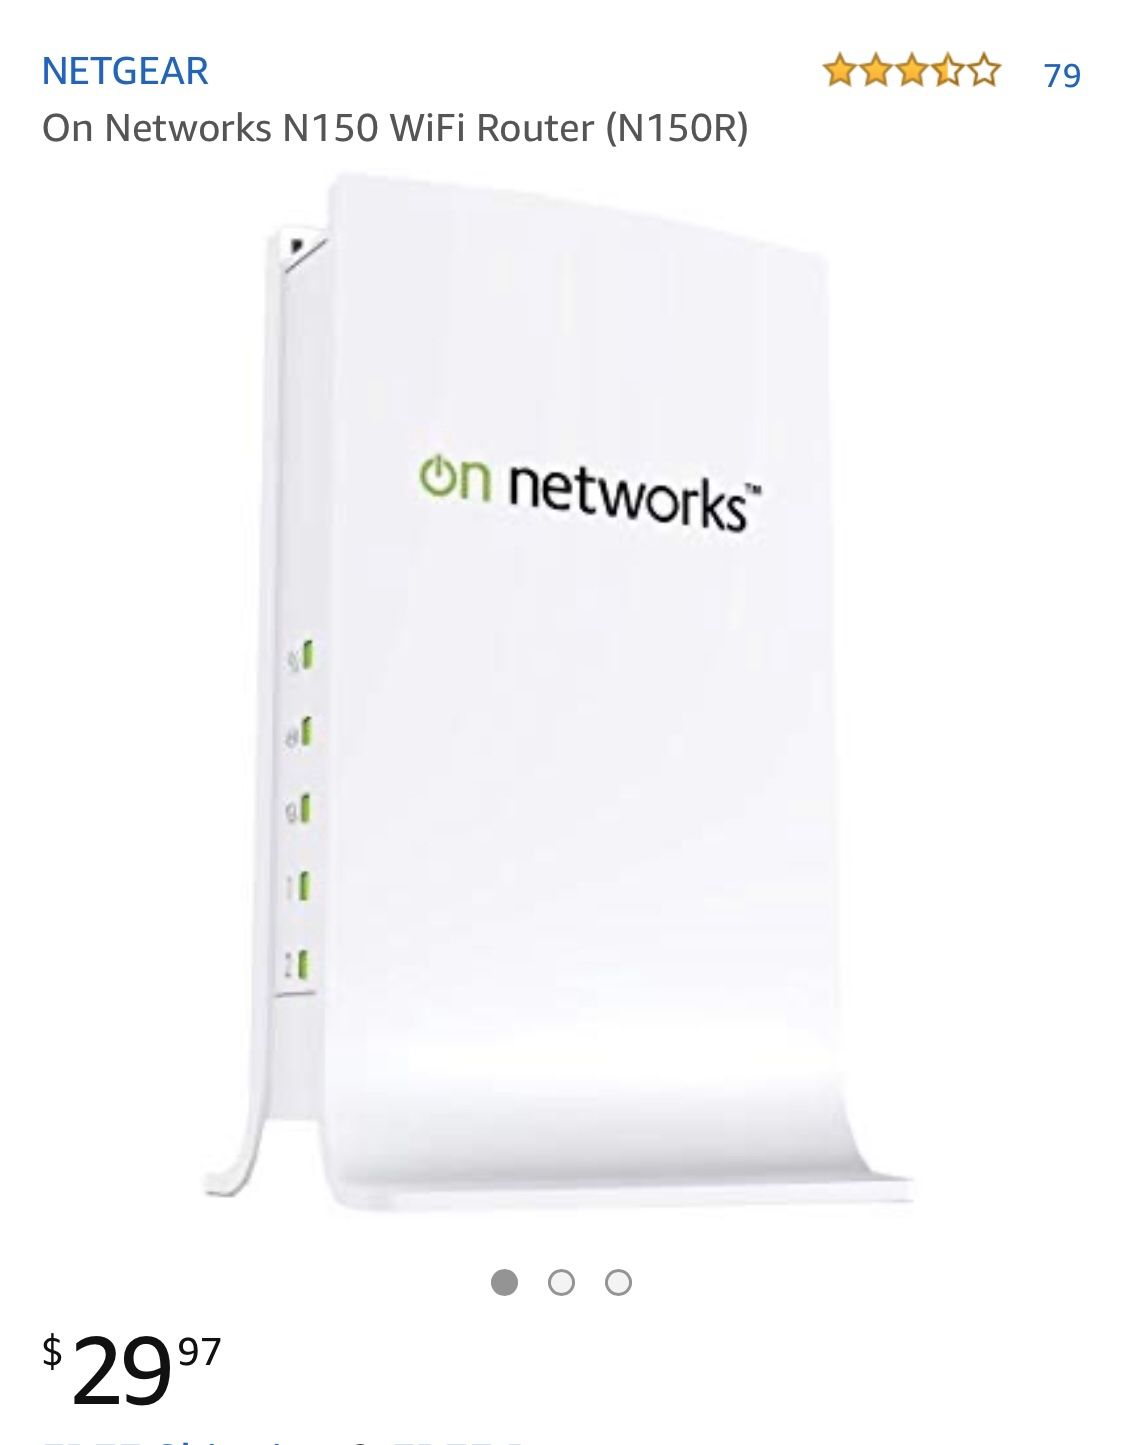 On networks Wifi Wireless Router New in box ! WiFi extends